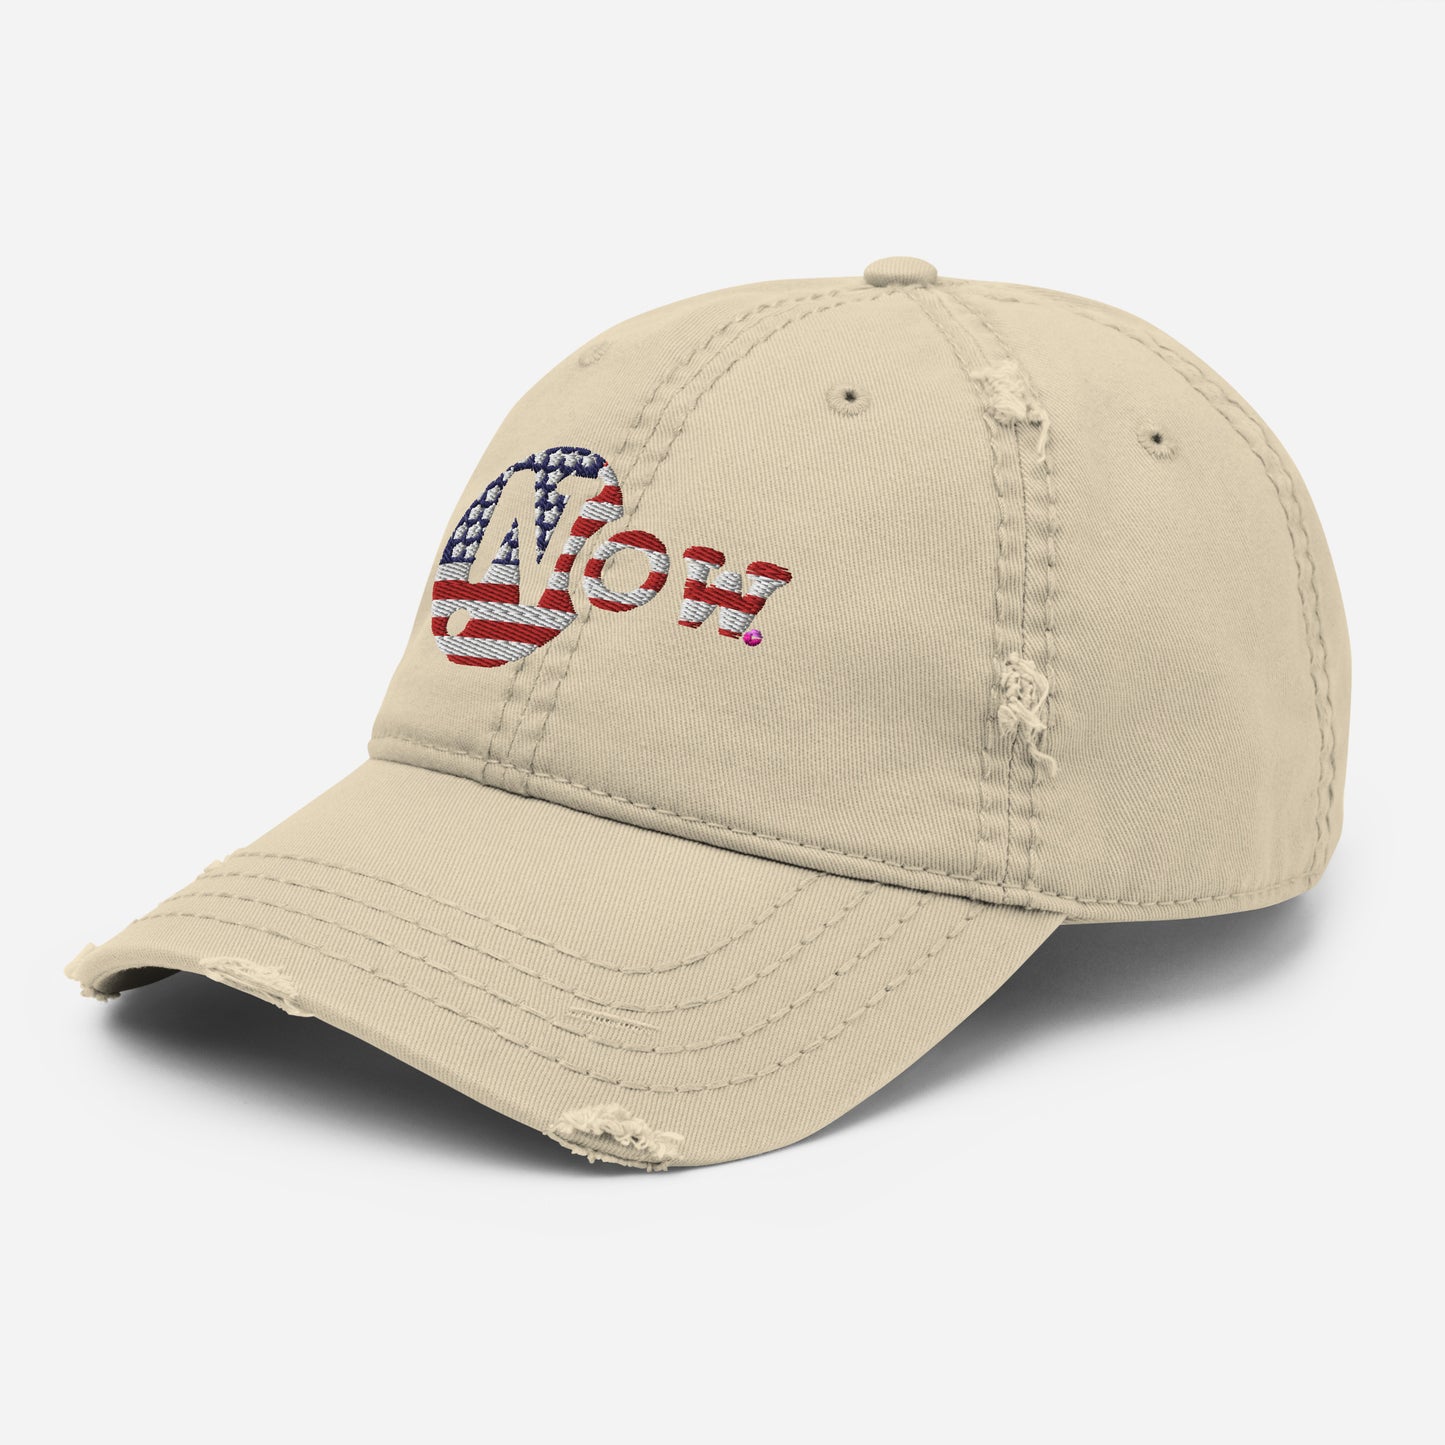 !N Cut Out USA Distressed Dad Hat